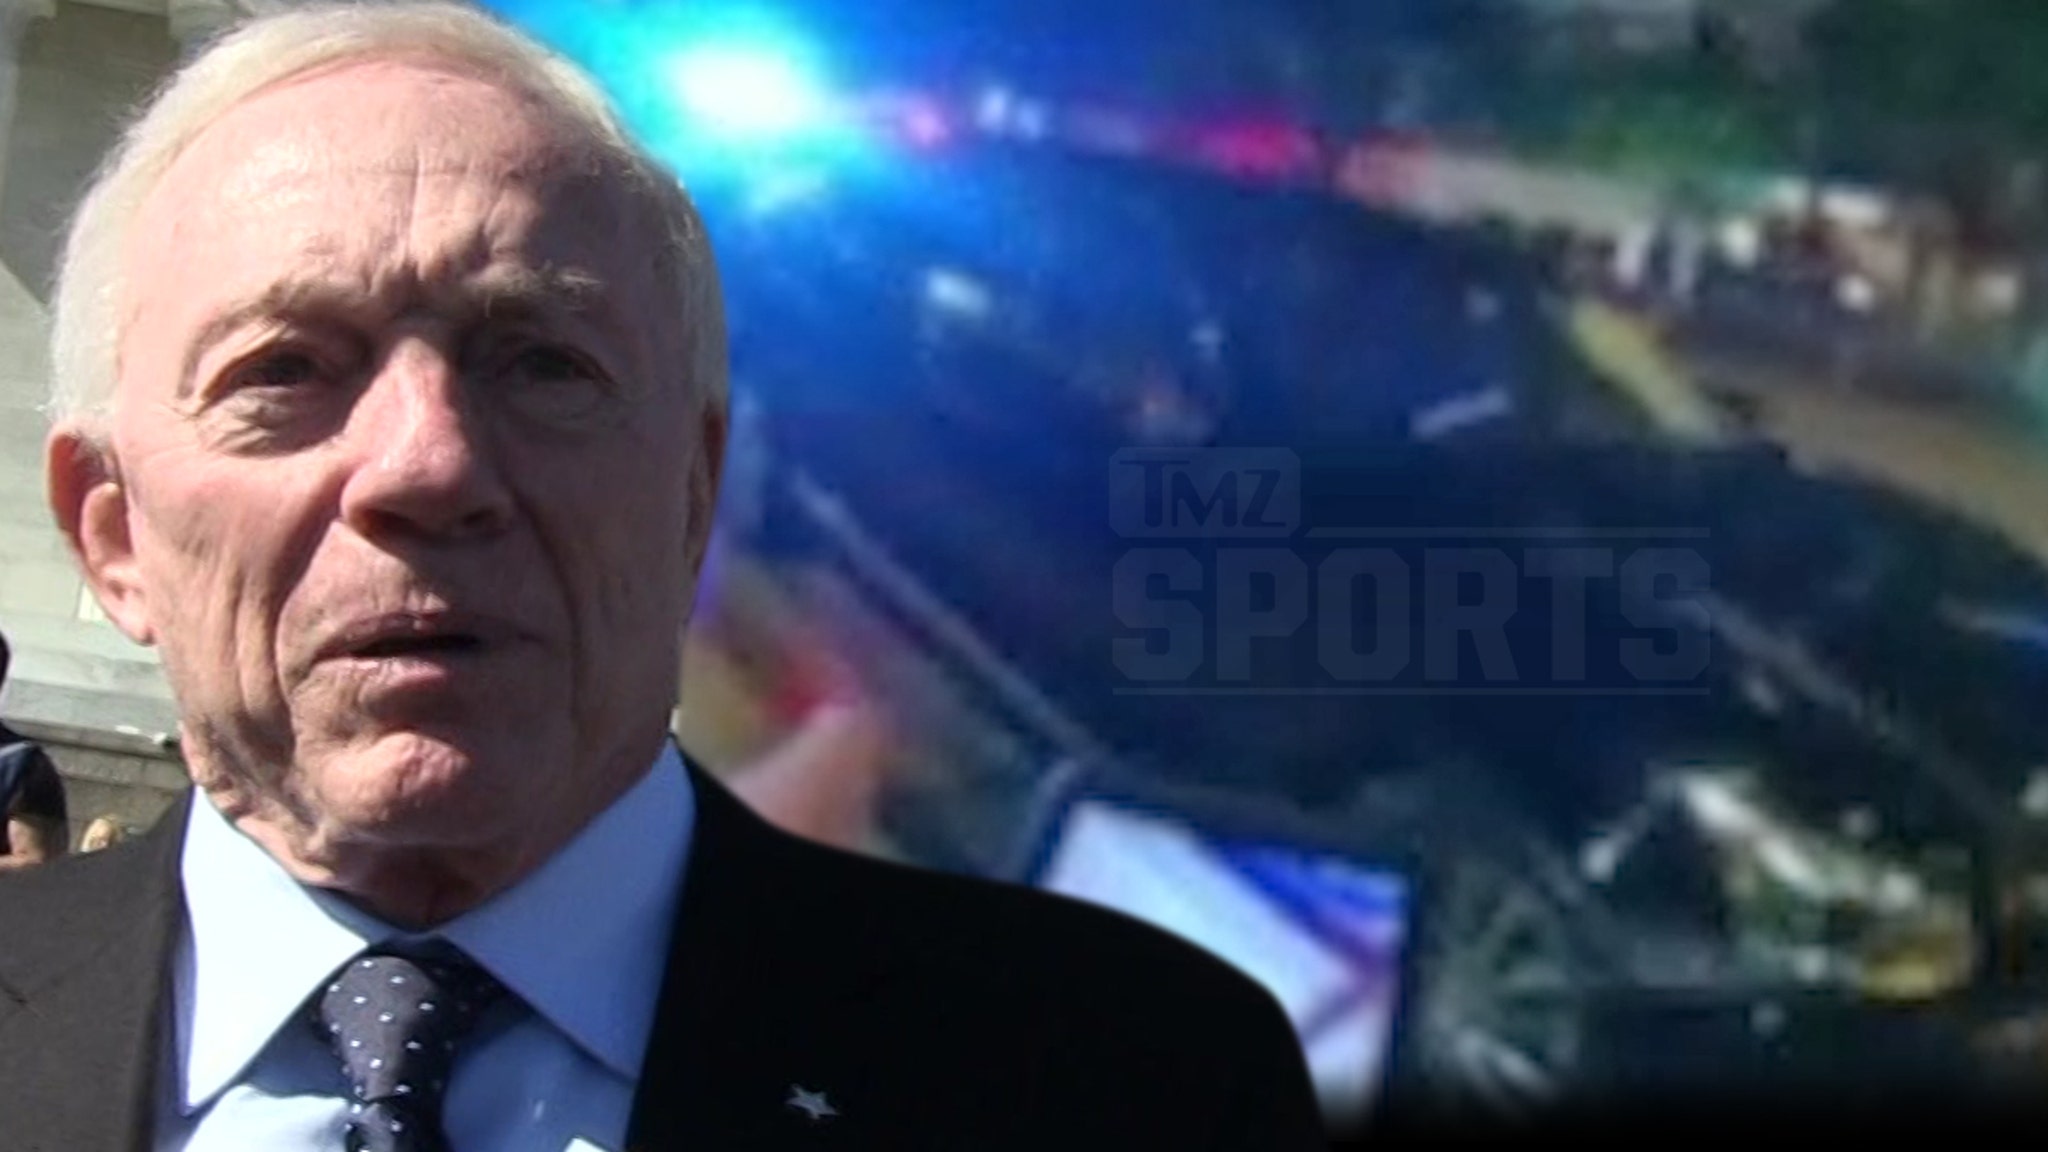 Jerry Jones Admitted He Wasn’t Wearing Seat Belt In Car Crash, Police Video Shows